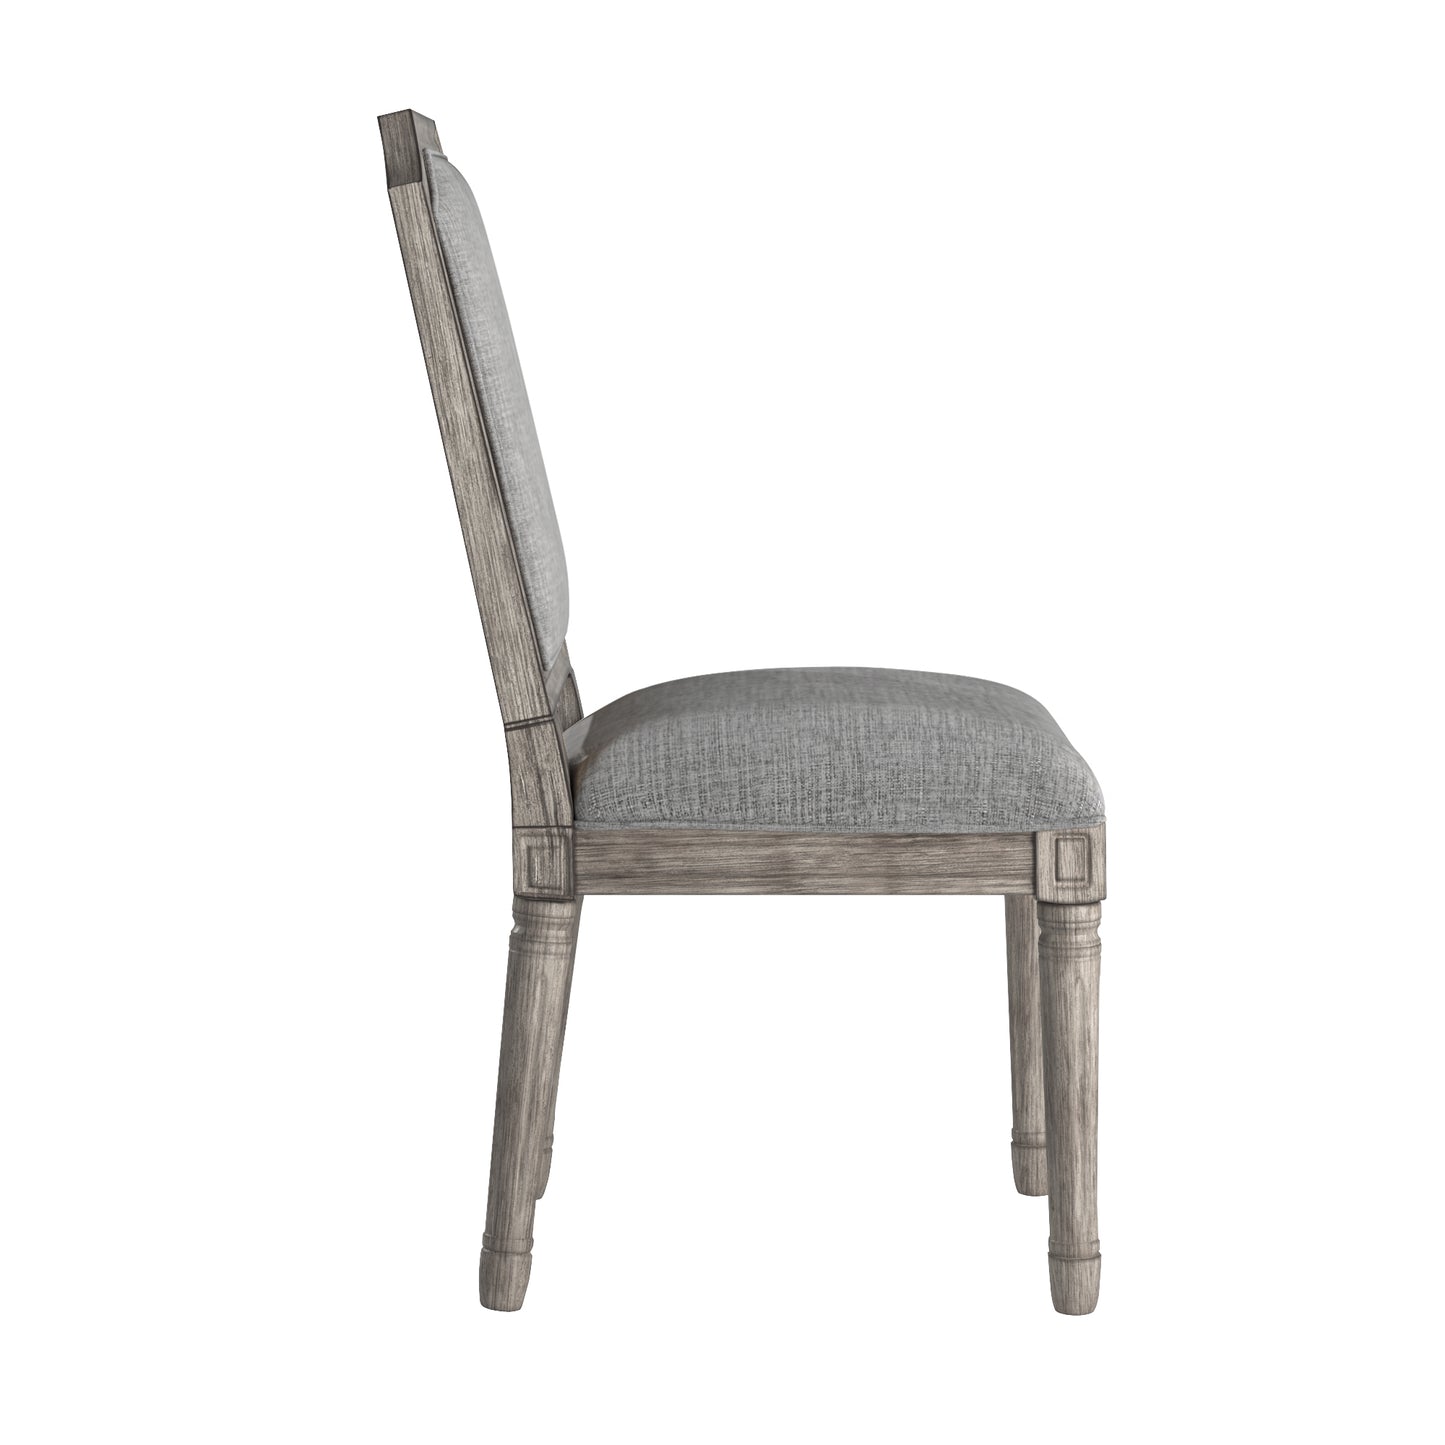 Arched Linen and Wood Dining Chairs (Set of 2) - Grey Linen, Antique Grey Oak Finish